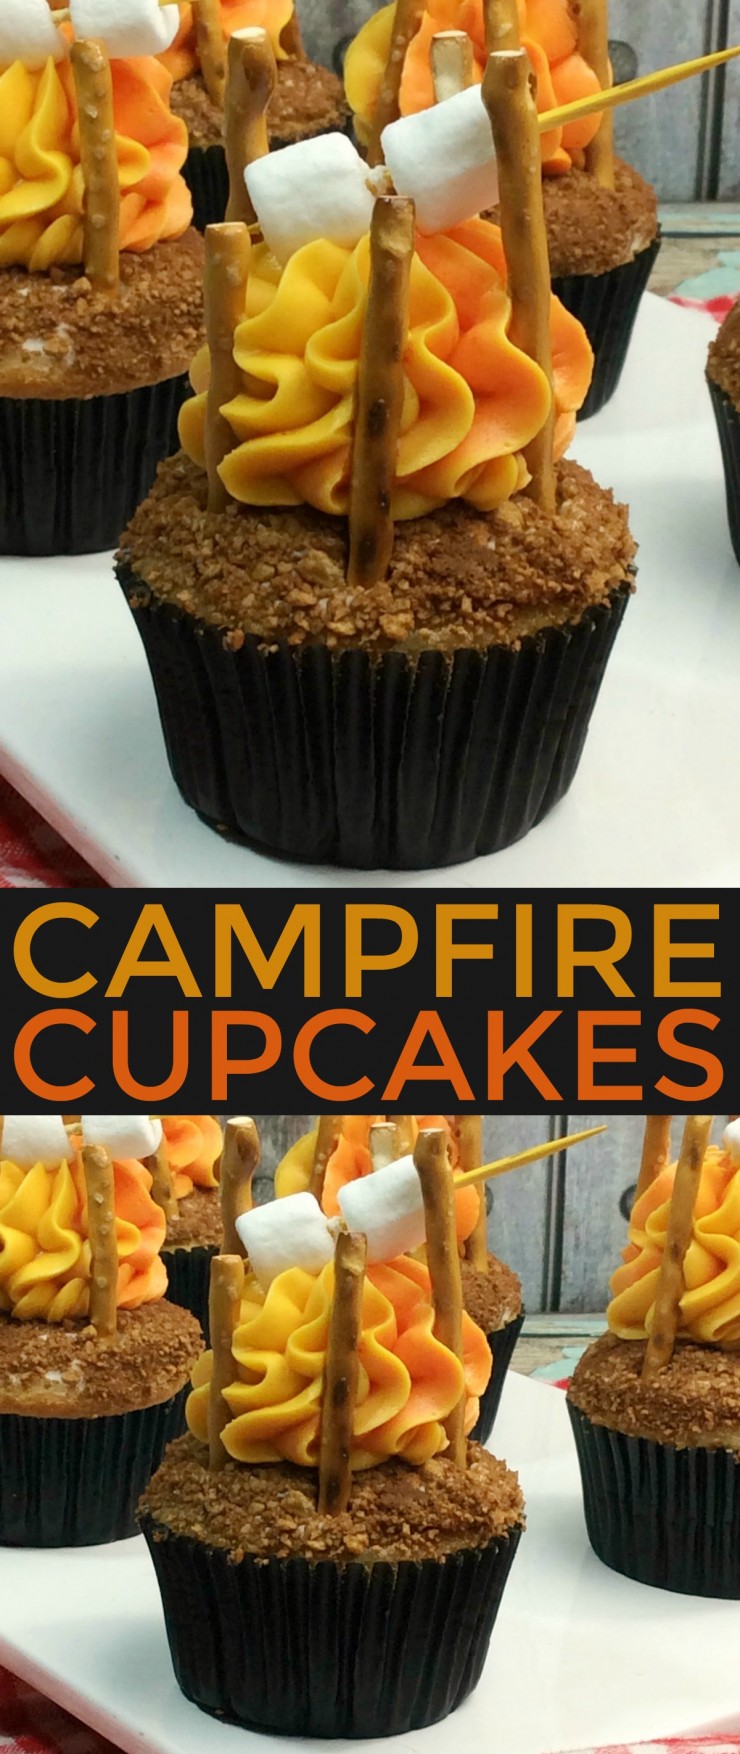 These Campfire Cupcakes are a fun summer treat. What an adorable dessert to take along for a camping trip or camping themed party. 